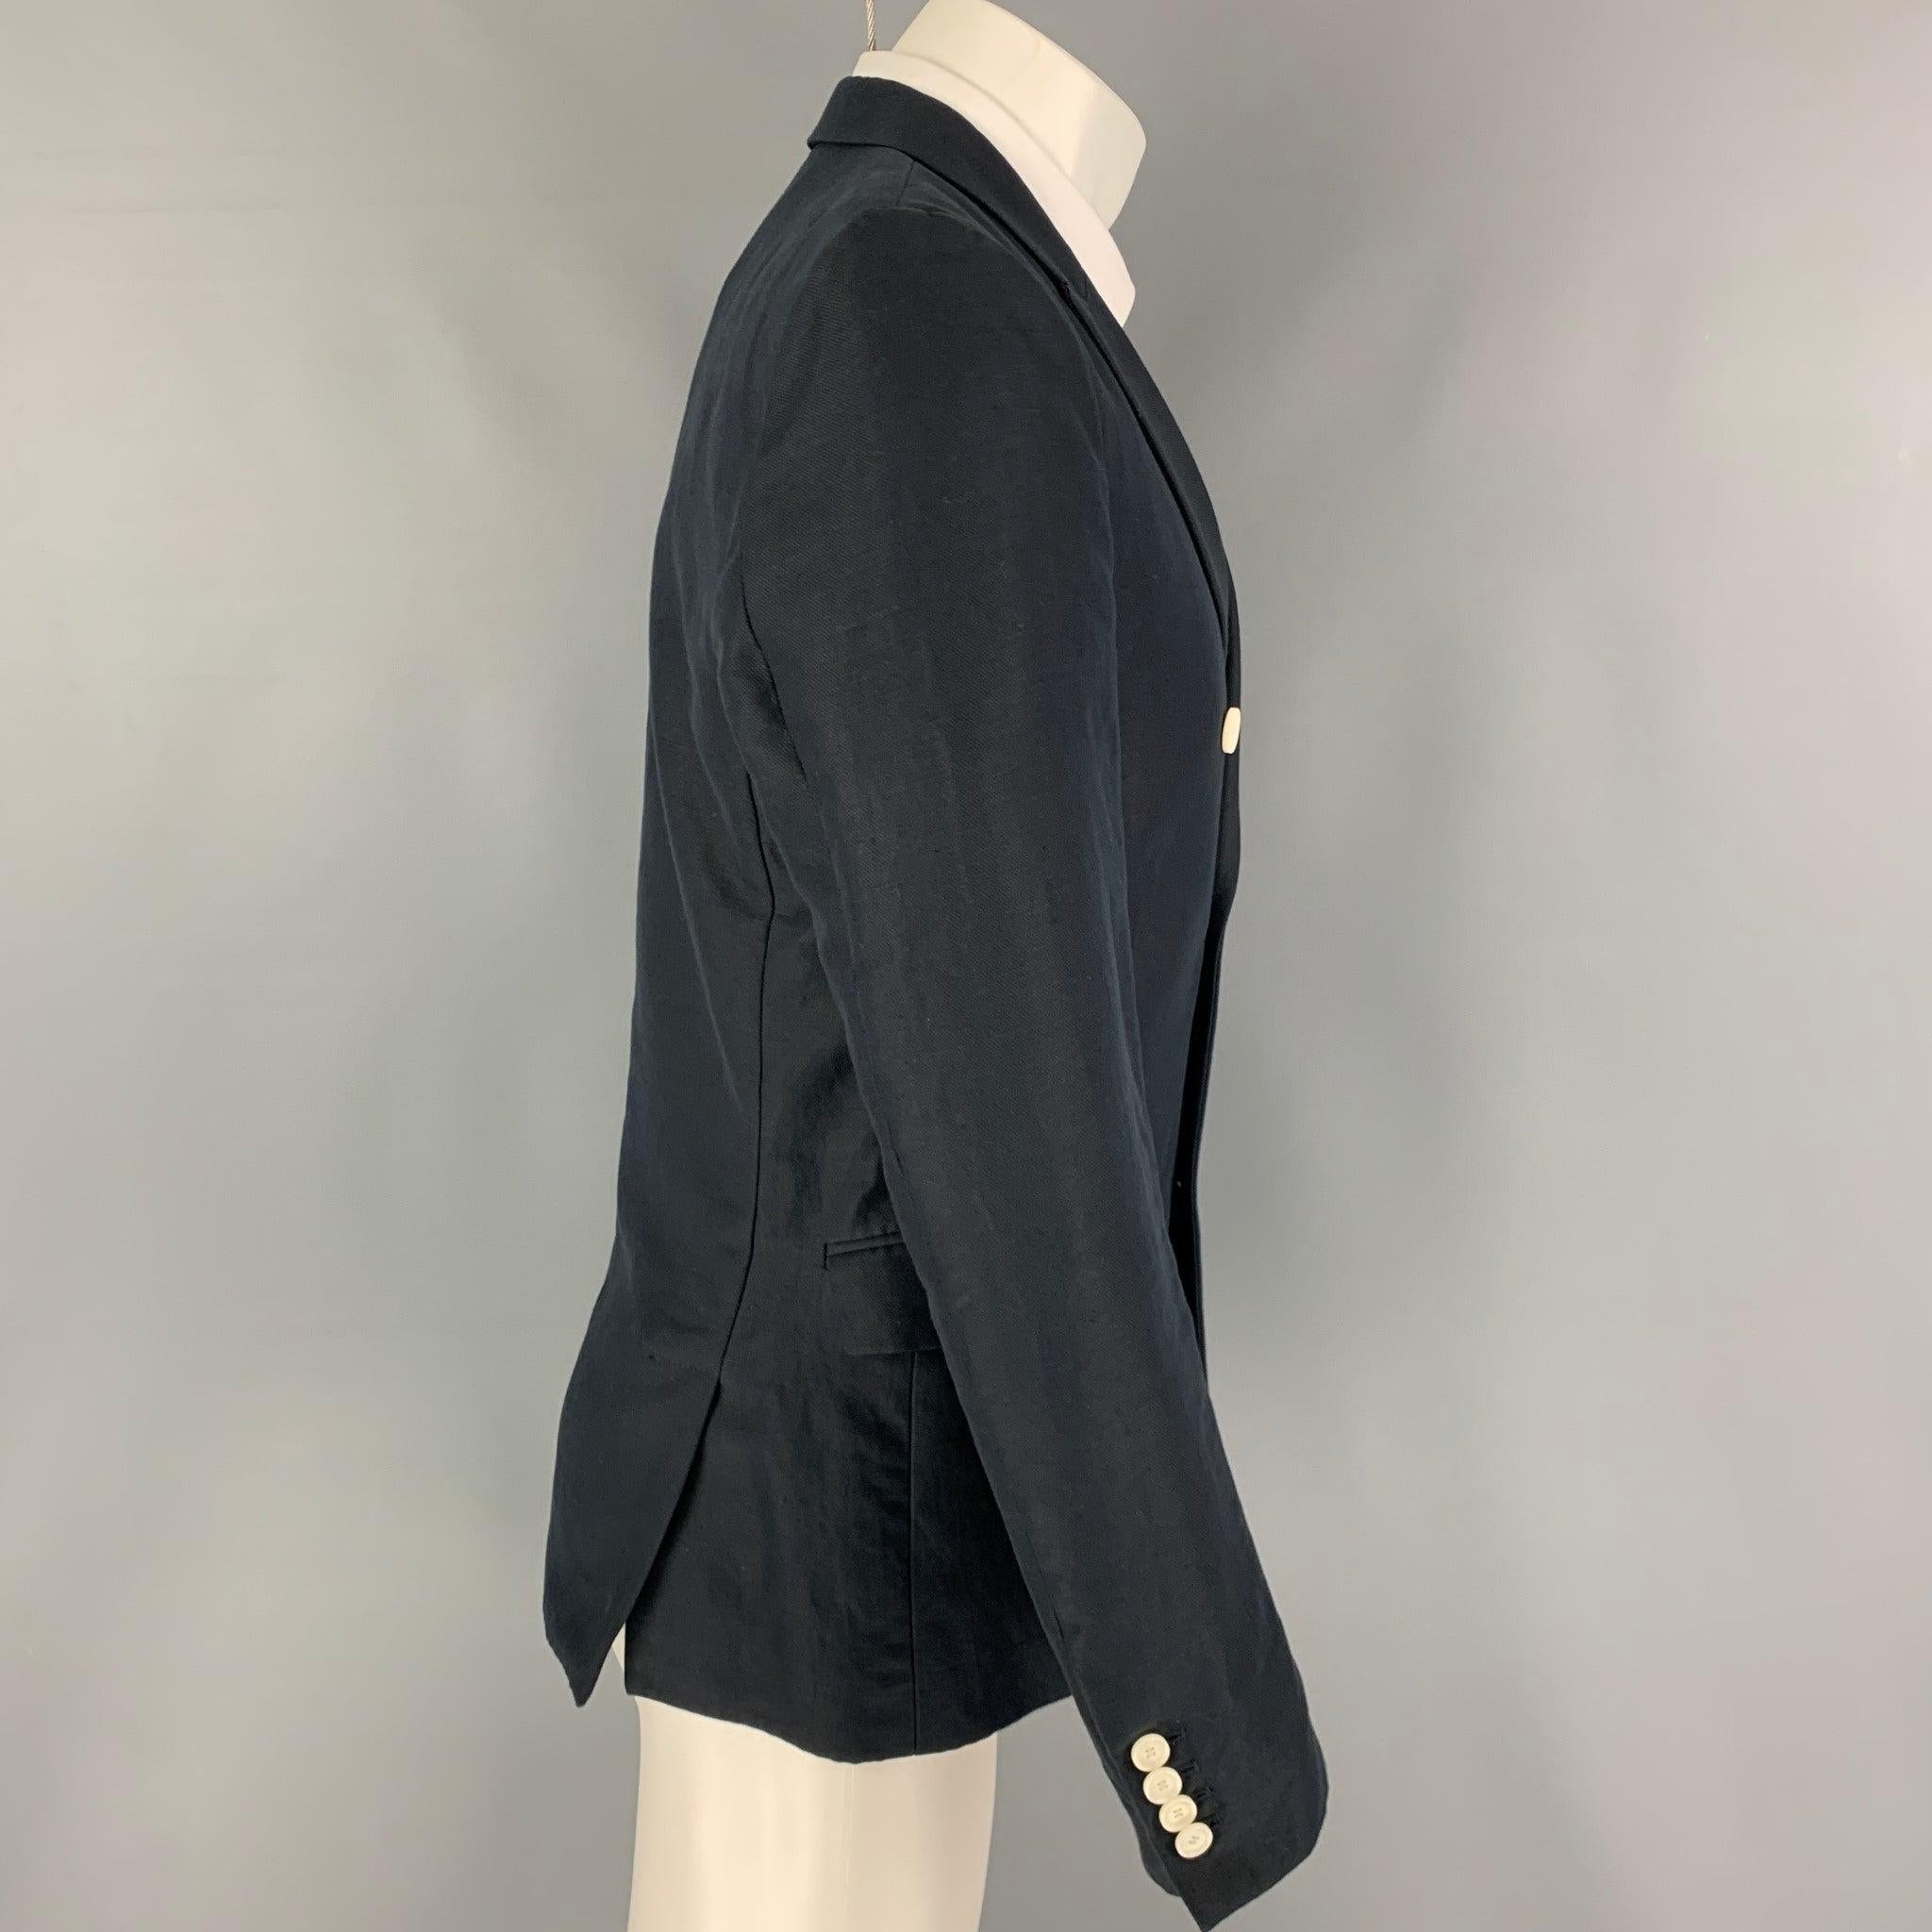 THE KOOPLES sport coat comes in a navy cotton / linen with a half liner featuring a peak lapel, flap pockets, double back vent, double breasted closure.
Excellent
Pre-Owned Condition. 

Marked:   48 

Measurements: 
 
Shoulder: 16 inches Chest: 38